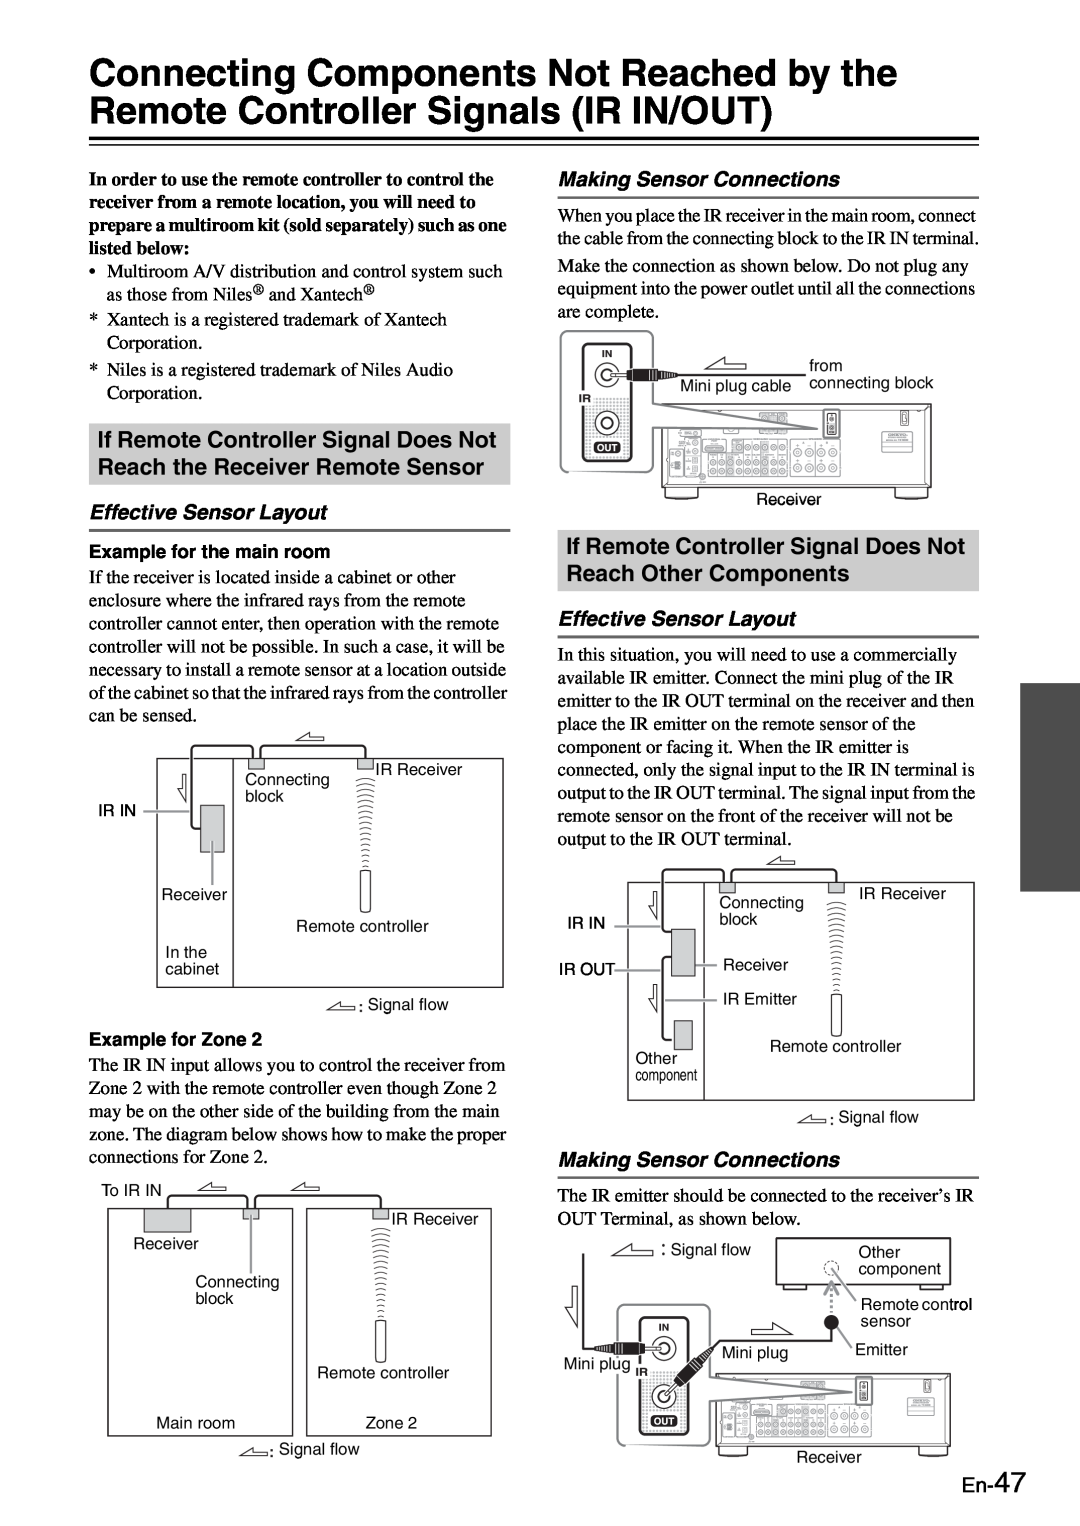 Onkyo TX-8050 Effective Sensor Layout, Making Sensor Connections, En-47, Example for the main room, Example for Zone 